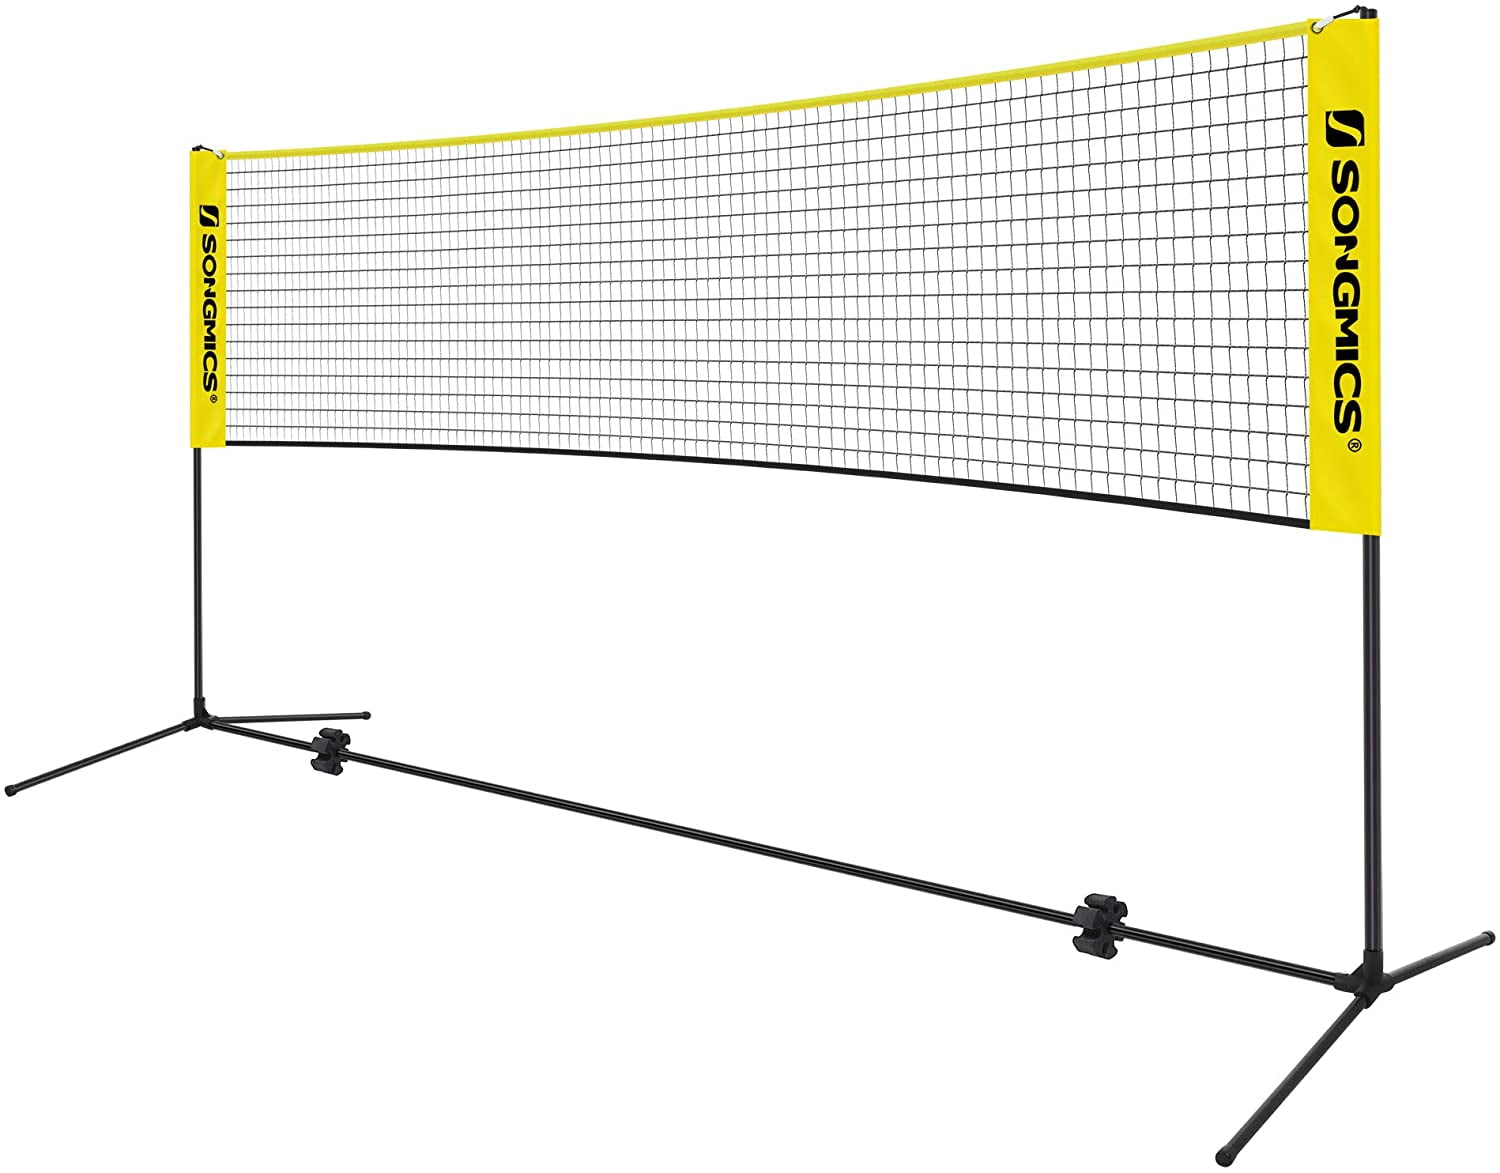 Easy Setup Nylon Sports Net with Poles Pickleball daiyanjing Adjustable Foldable Portable Badminton Net Set For Indoor or Outdoor Court Net for Tennis Driveway Kids Volleyball Beach 